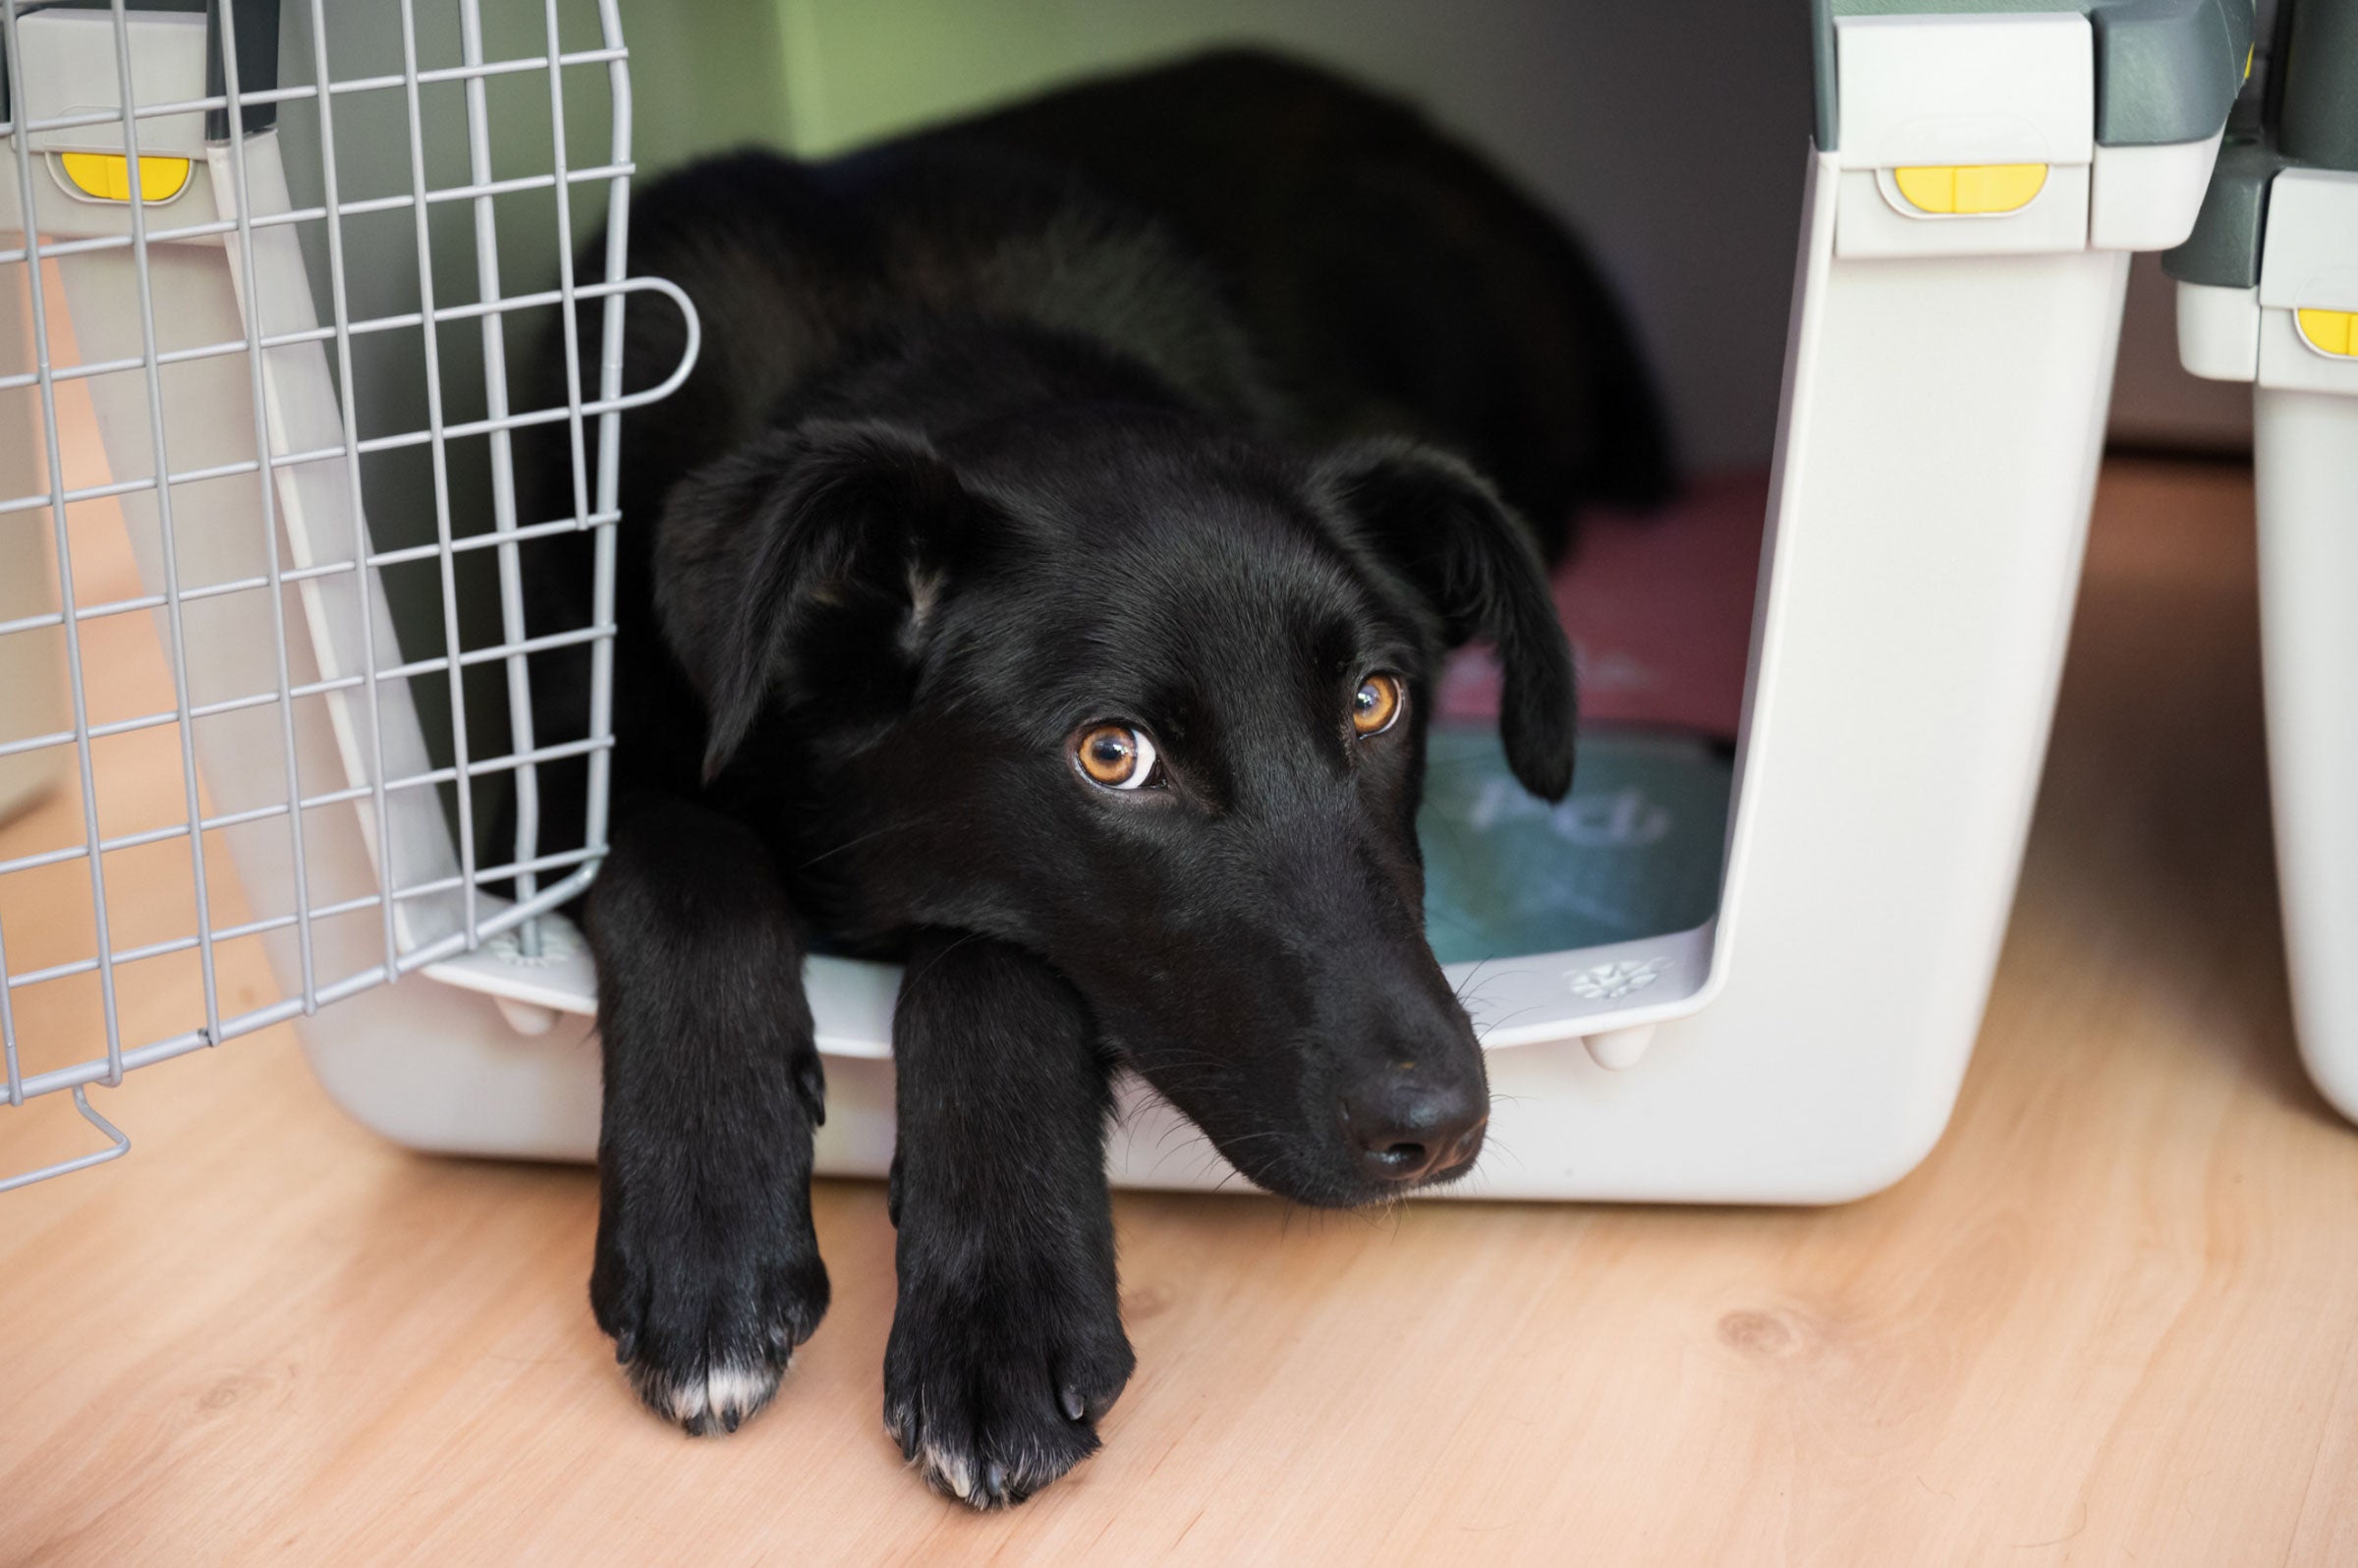 Understanding Why Your New Dog Won't Leave the Crate